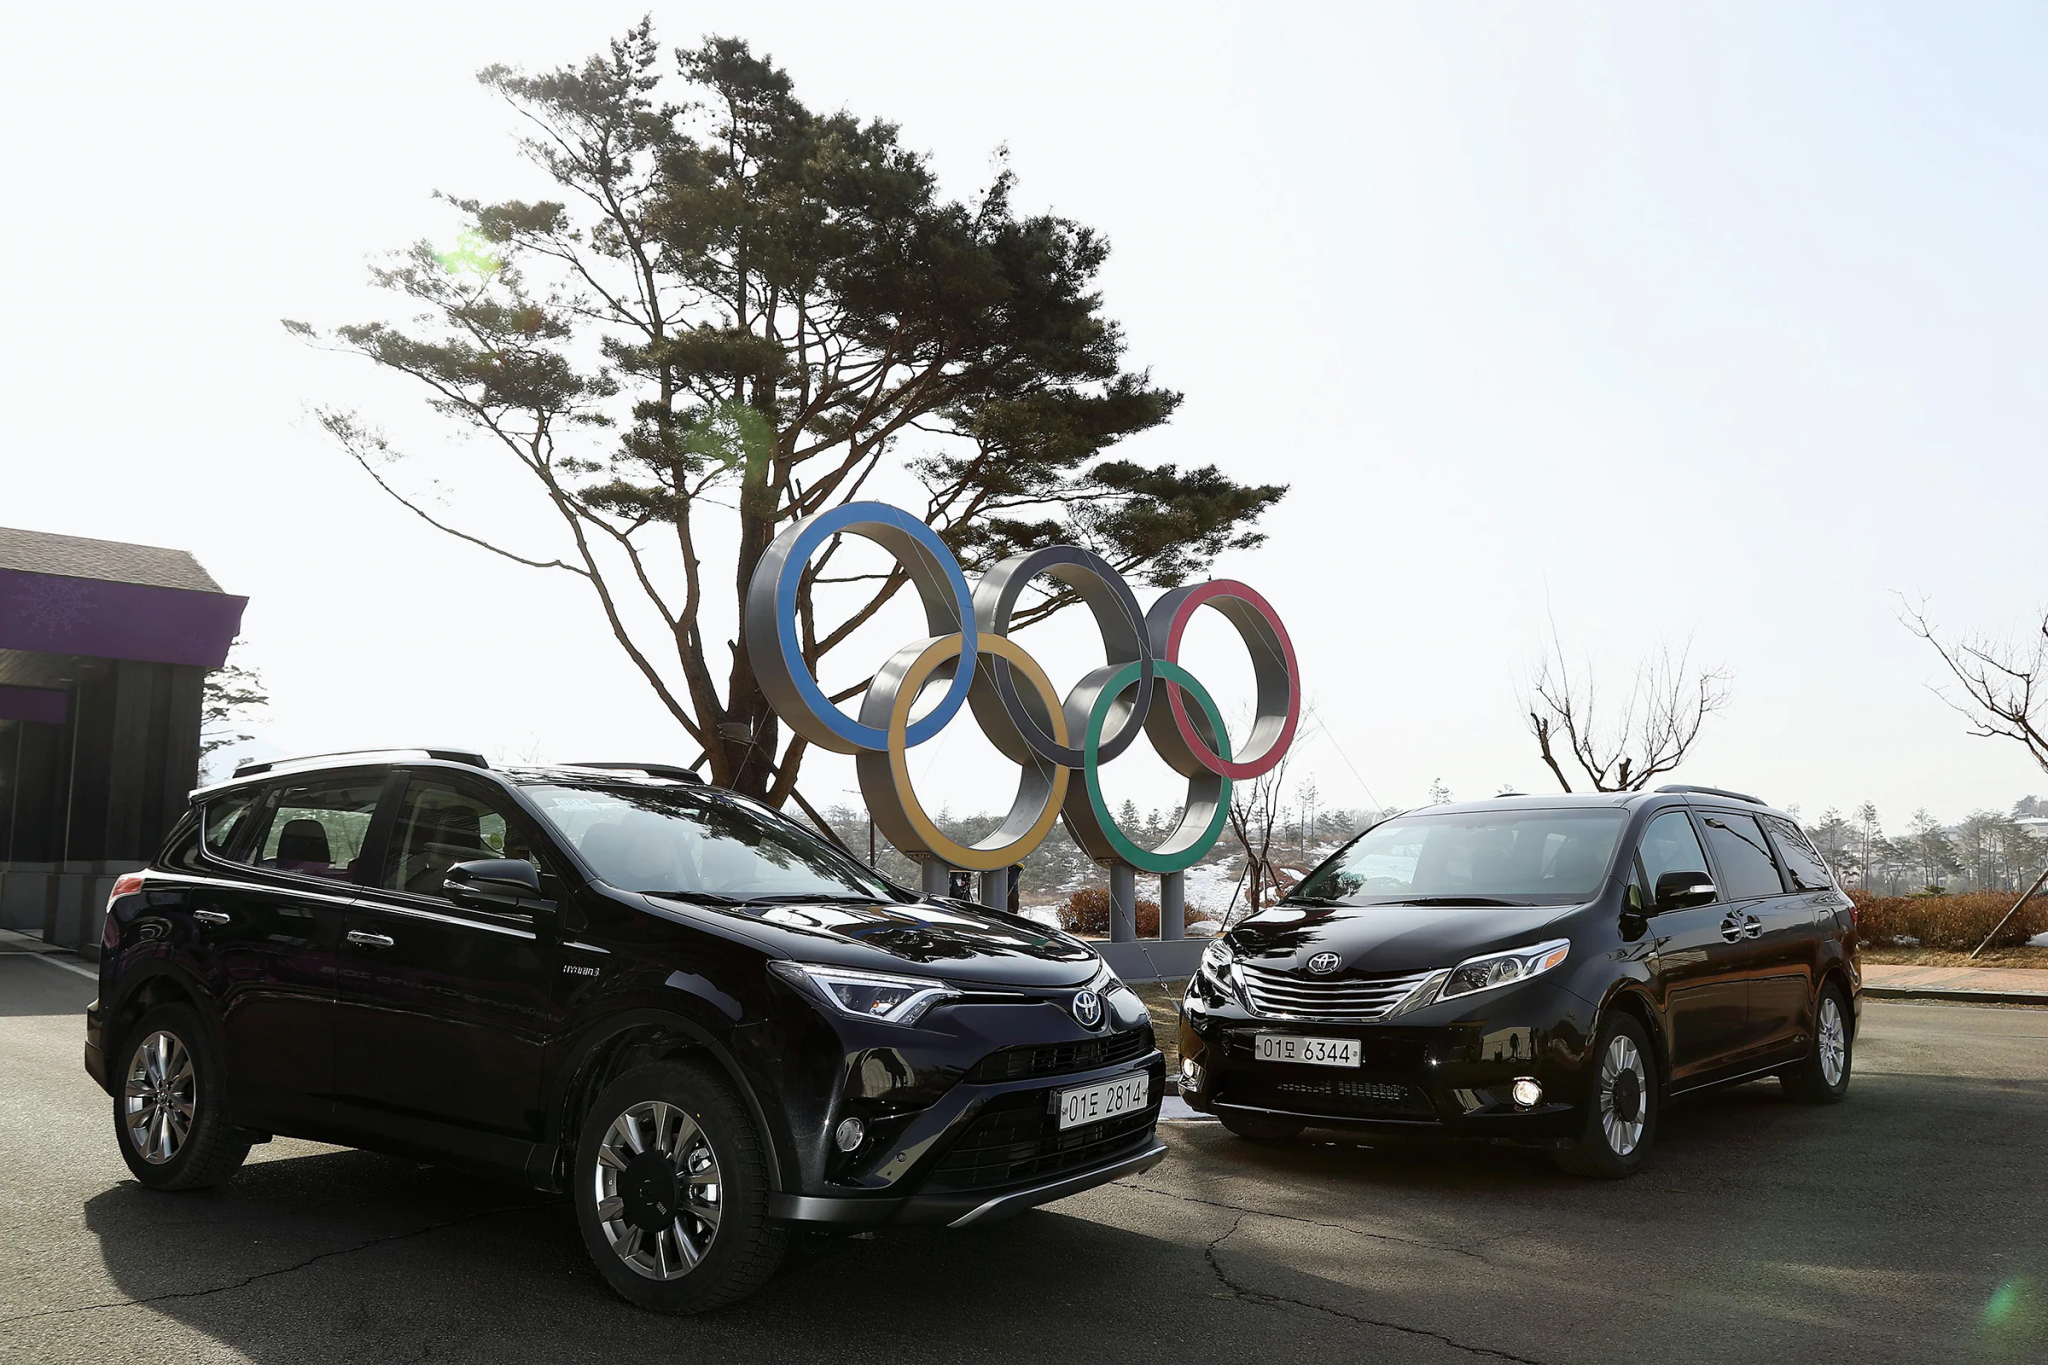 Air Liquide is set to power vehicles from the IOC's world wide mobility partner Toyota which will form the official Paris 2024 fleet ©IOC